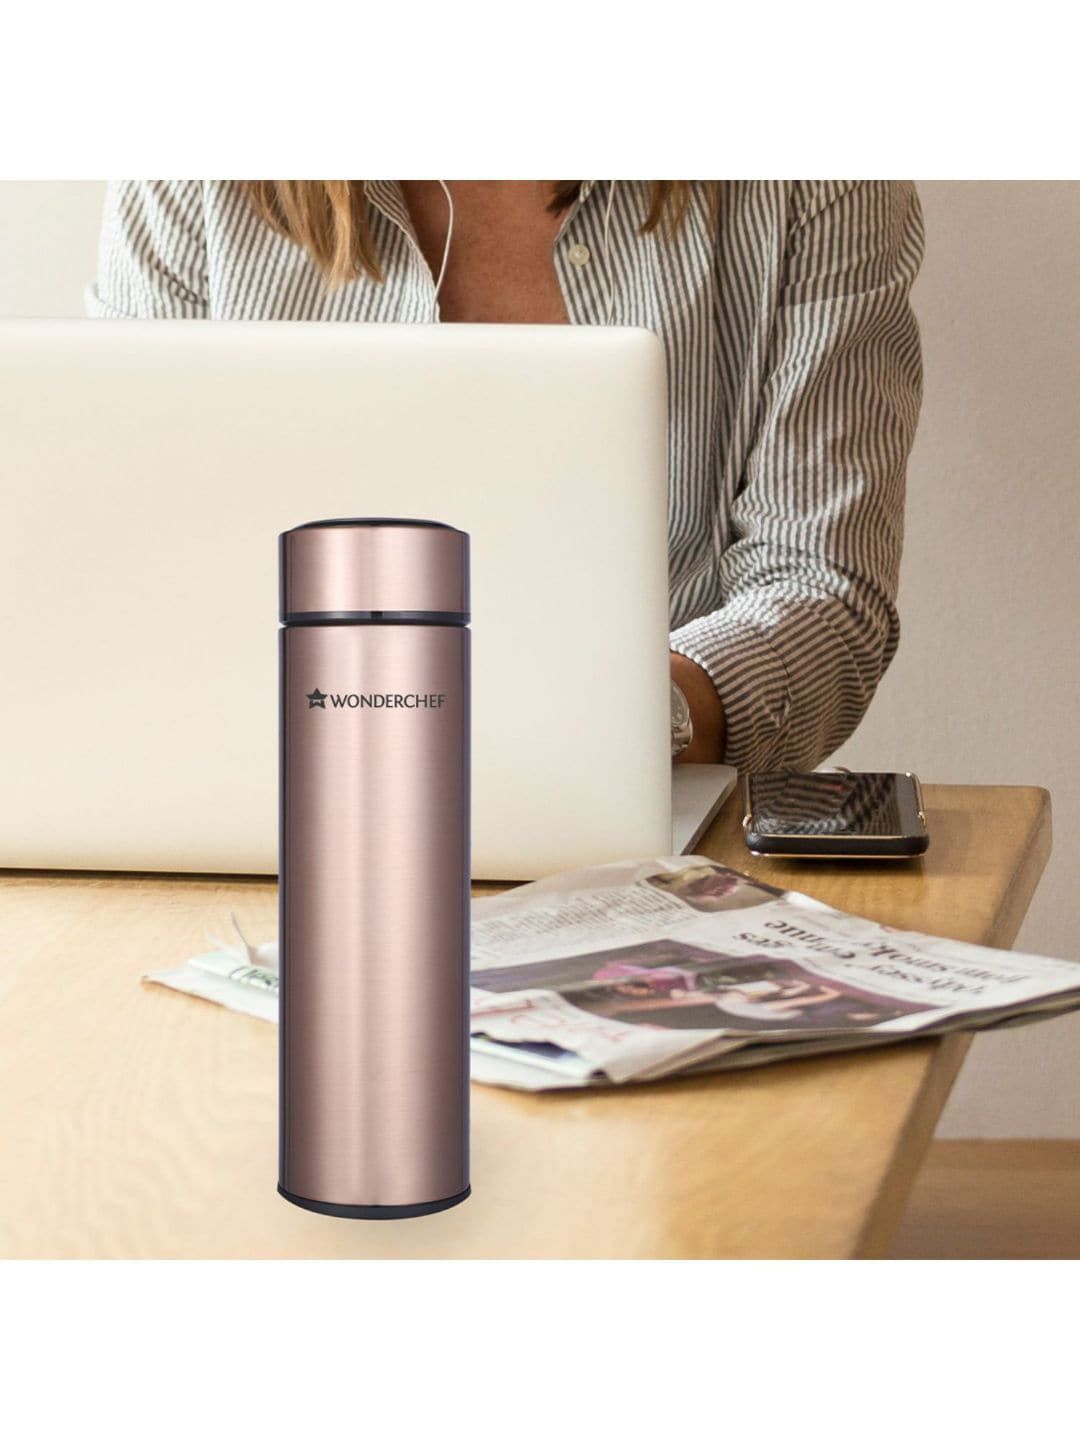 Wonderchef Rose Gold-Toned Solid Stainless Steel Vacuum Insulated Water Bottle 480ML Price in India